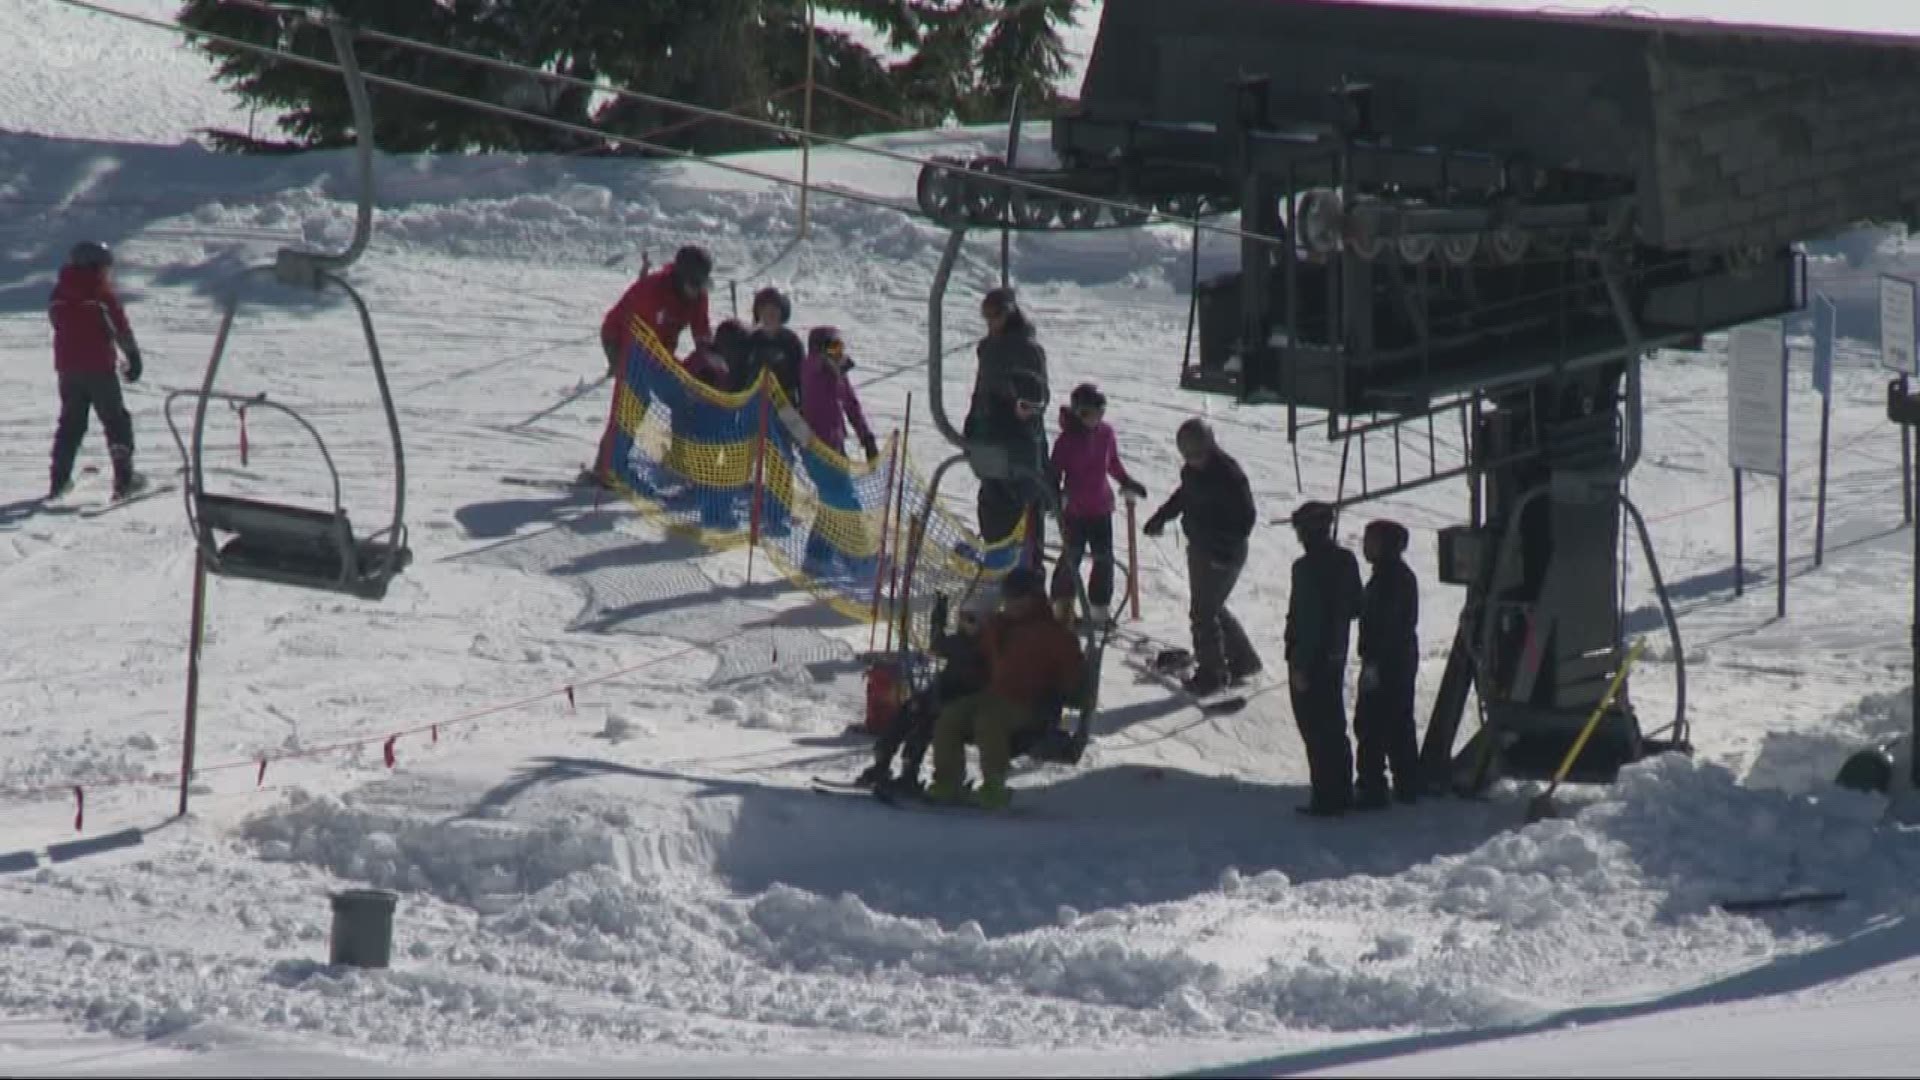 Both Mt. Hood Meadows and Timberline are closing for at least a week due to concerns about the spread of coronavirus.